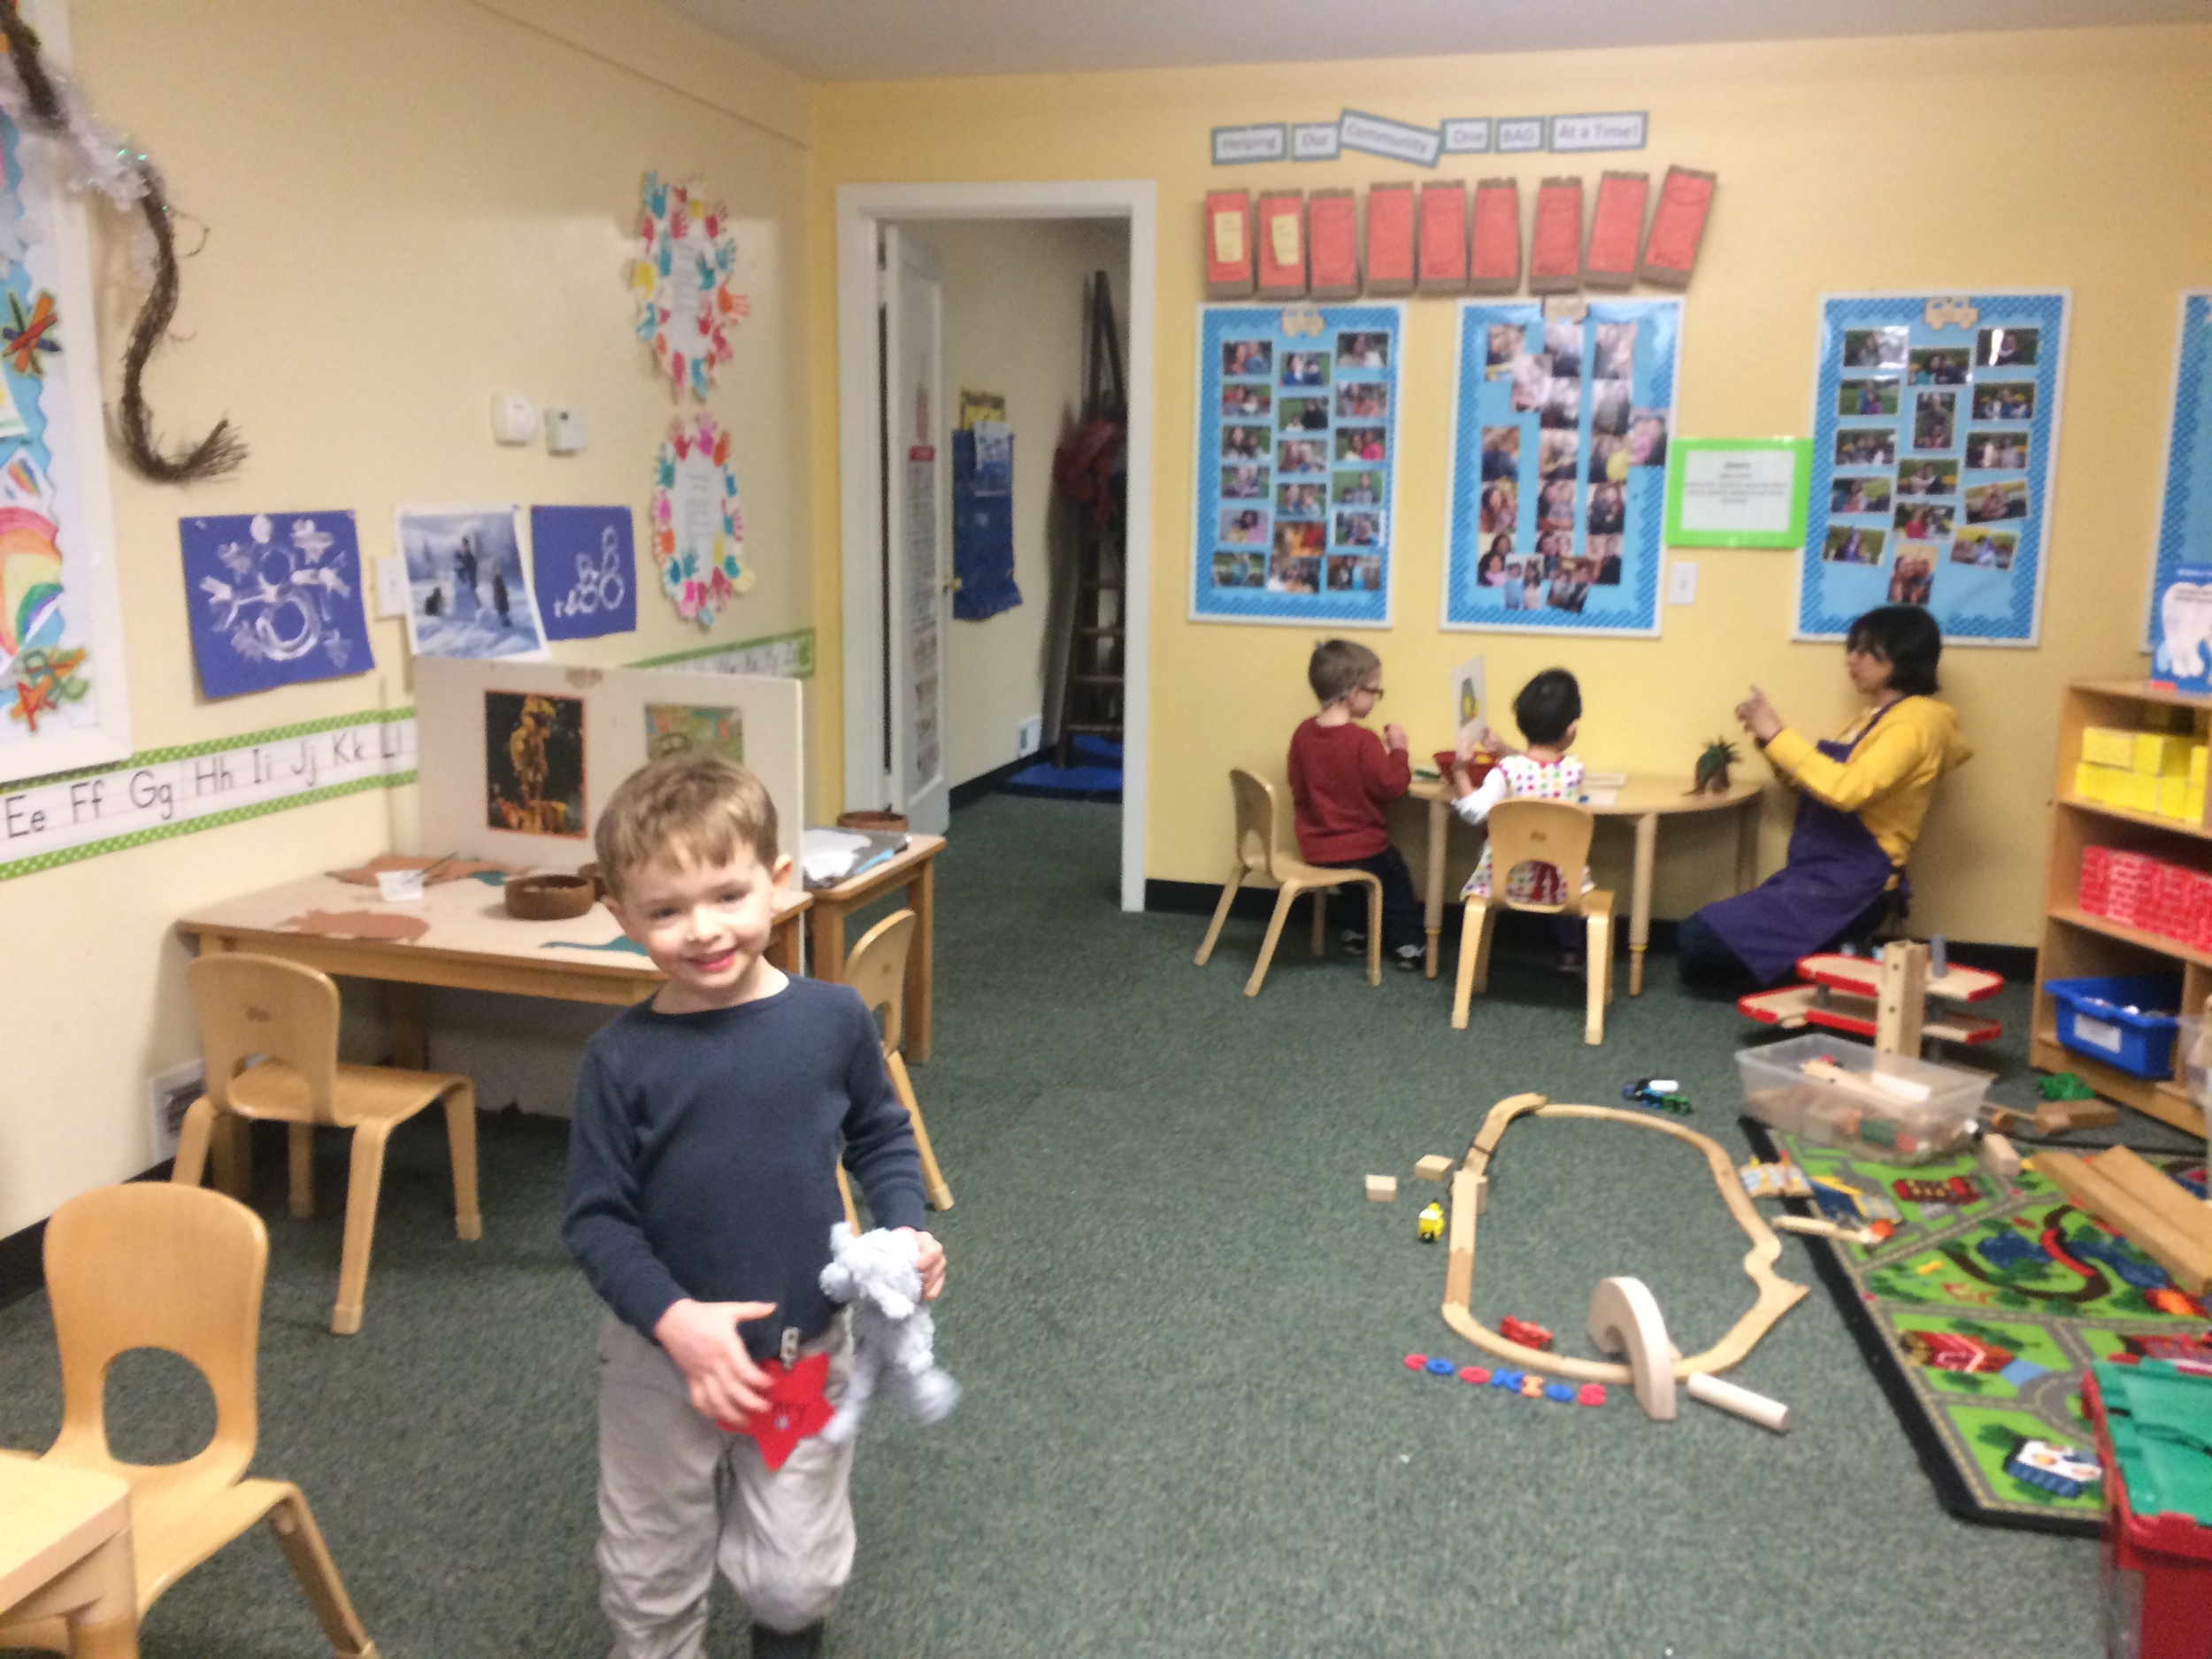 Our classroom is set up differently every week with a variety of activity and art stations.